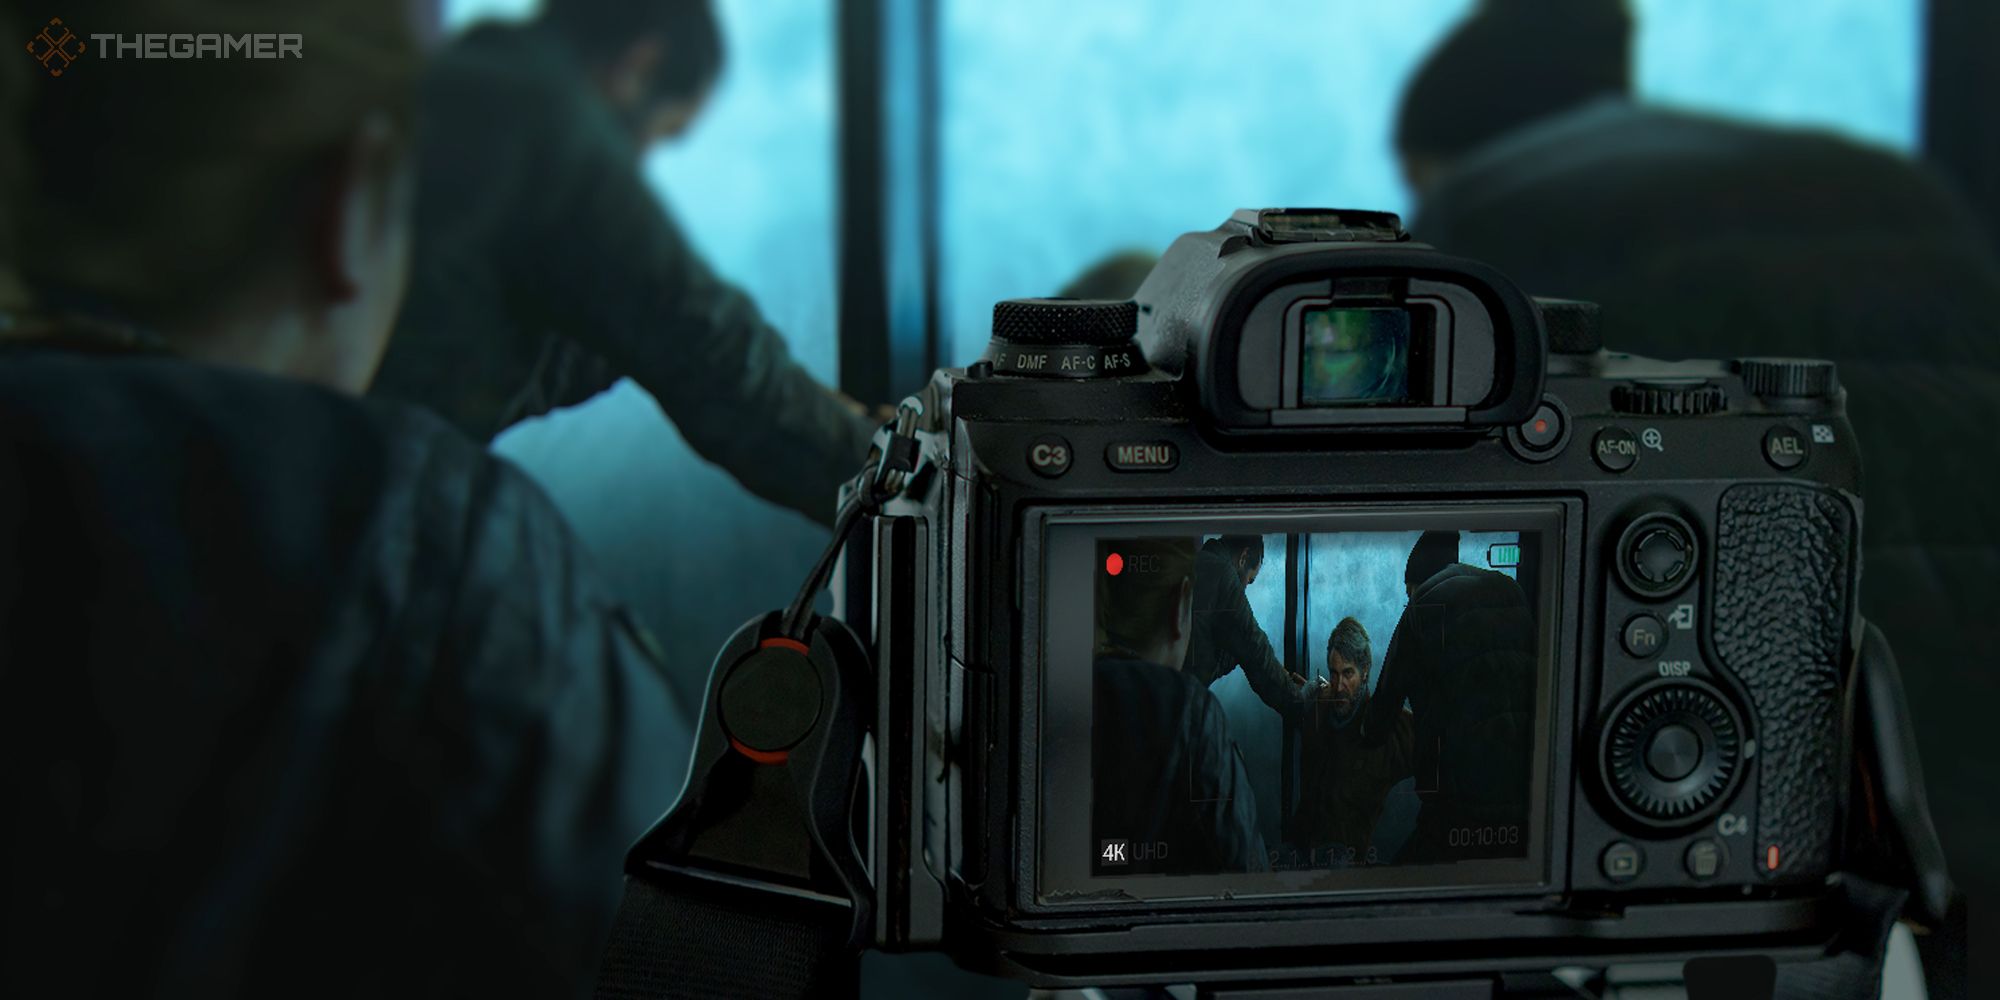 A camera pointed at Joel's death scene from The Last of Us Part 2, with the scene seen through the camera's screen